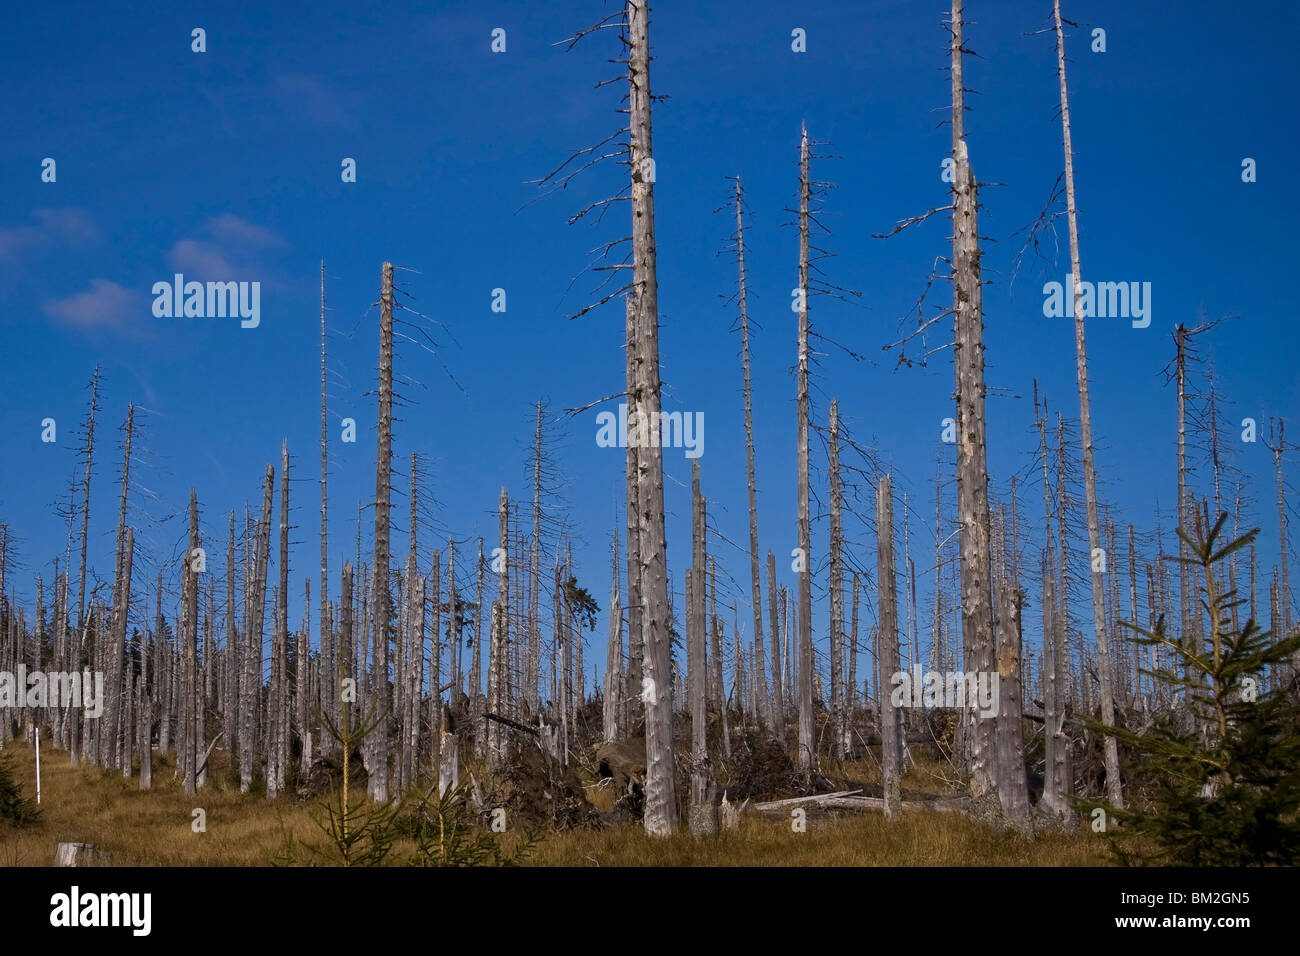 Forest decline in Sumava forest Stock Photo